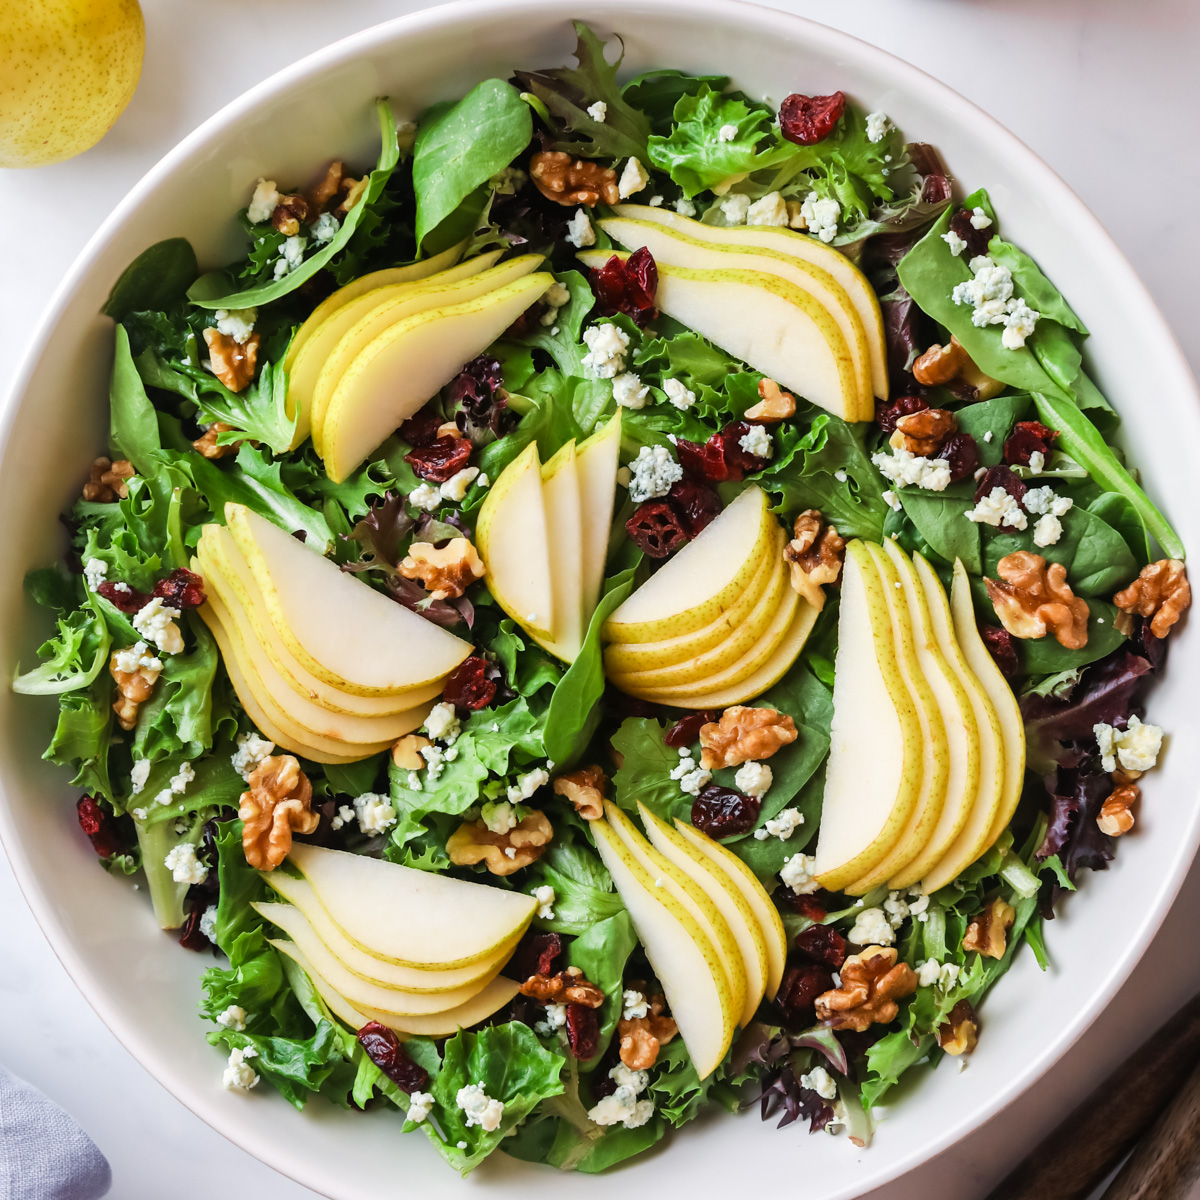 Pear salad with blue cheese.